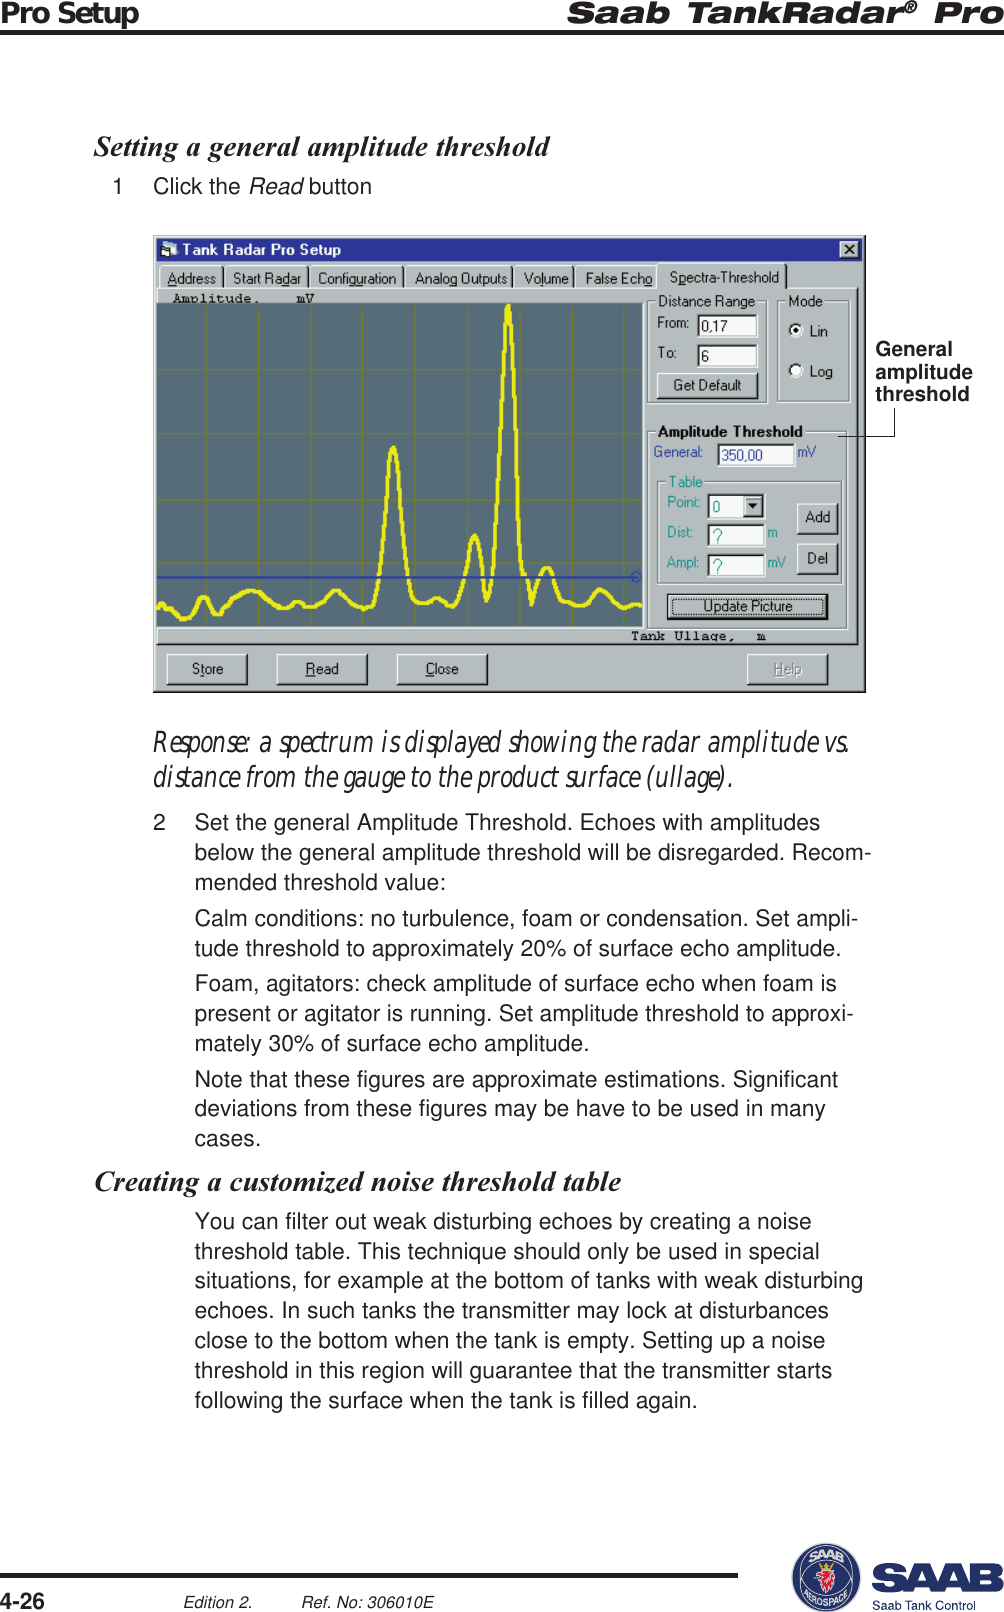 Saab TankRadar® ProPro Setup4-26Edition 2. Ref. No: 306010ESetting a general amplitude threshold1 Click the Read buttonResponse: a spectrum is displayed showing the radar amplitude vs.distance from the gauge to the product surface (ullage).2 Set the general Amplitude Threshold. Echoes with amplitudesbelow the general amplitude threshold will be disregarded. Recom-mended threshold value:Calm conditions: no turbulence, foam or condensation. Set ampli-tude threshold to approximately 20% of surface echo amplitude.Foam, agitators: check amplitude of surface echo when foam ispresent or agitator is running. Set amplitude threshold to approxi-mately 30% of surface echo amplitude.Note that these figures are approximate estimations. Significantdeviations from these figures may be have to be used in manycases.Creating a customized noise threshold tableYou can filter out weak disturbing echoes by creating a noisethreshold table. This technique should only be used in specialsituations, for example at the bottom of tanks with weak disturbingechoes. In such tanks the transmitter may lock at disturbancesclose to the bottom when the tank is empty. Setting up a noisethreshold in this region will guarantee that the transmitter startsfollowing the surface when the tank is filled again.Generalamplitudethreshold